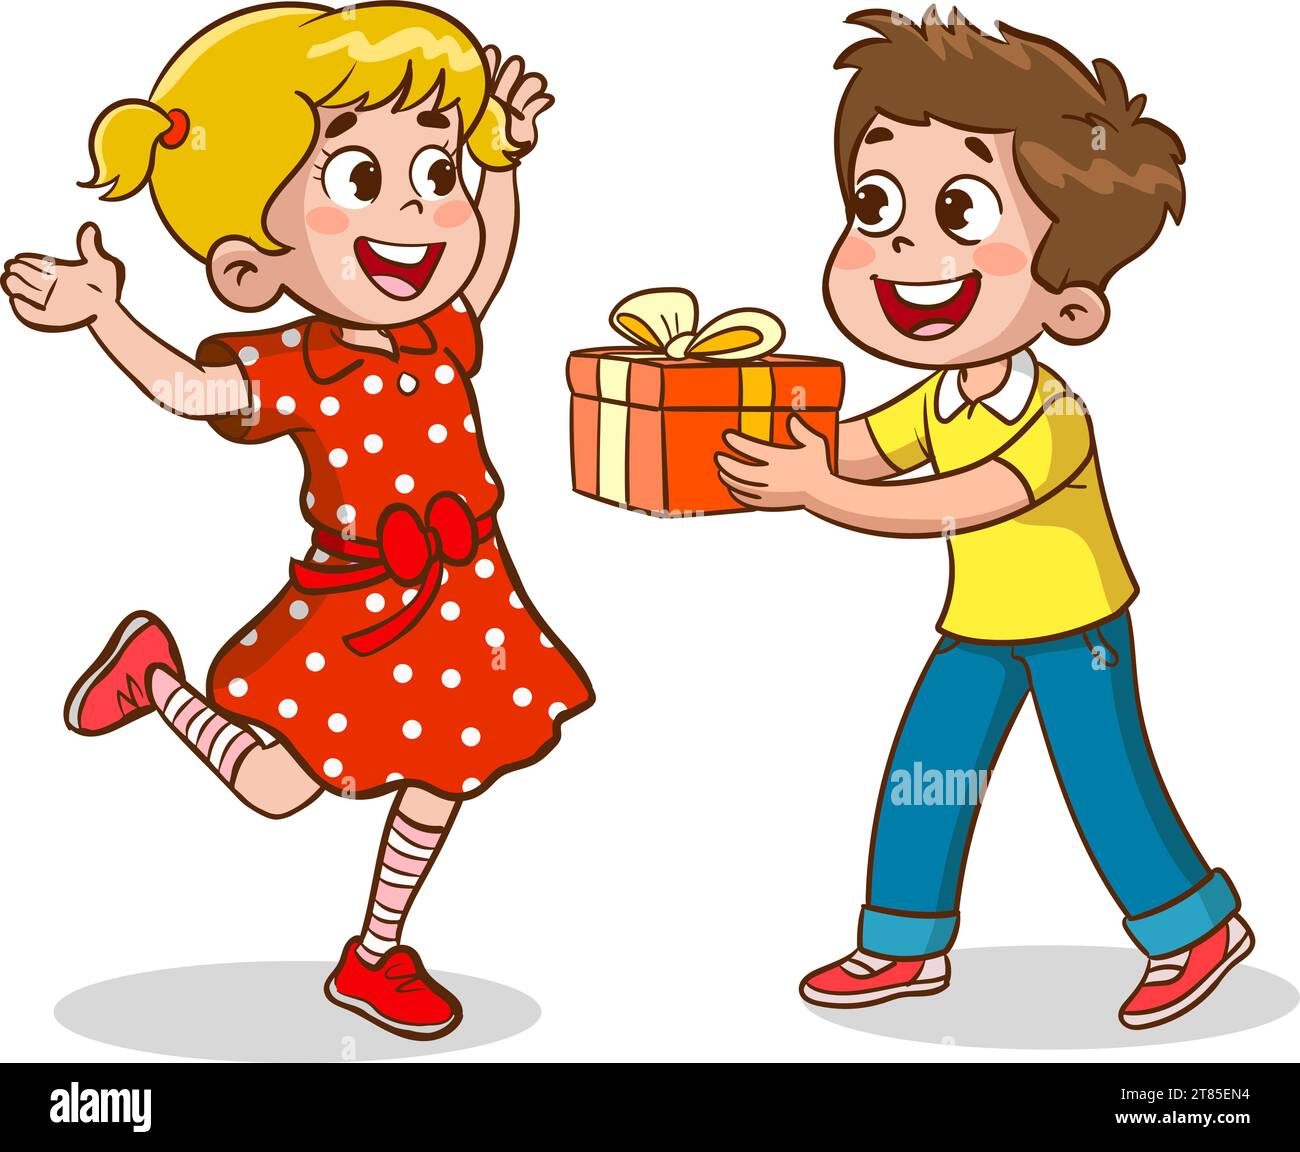 bought a gift for their friend. giving a gift to his friend Stock Vector